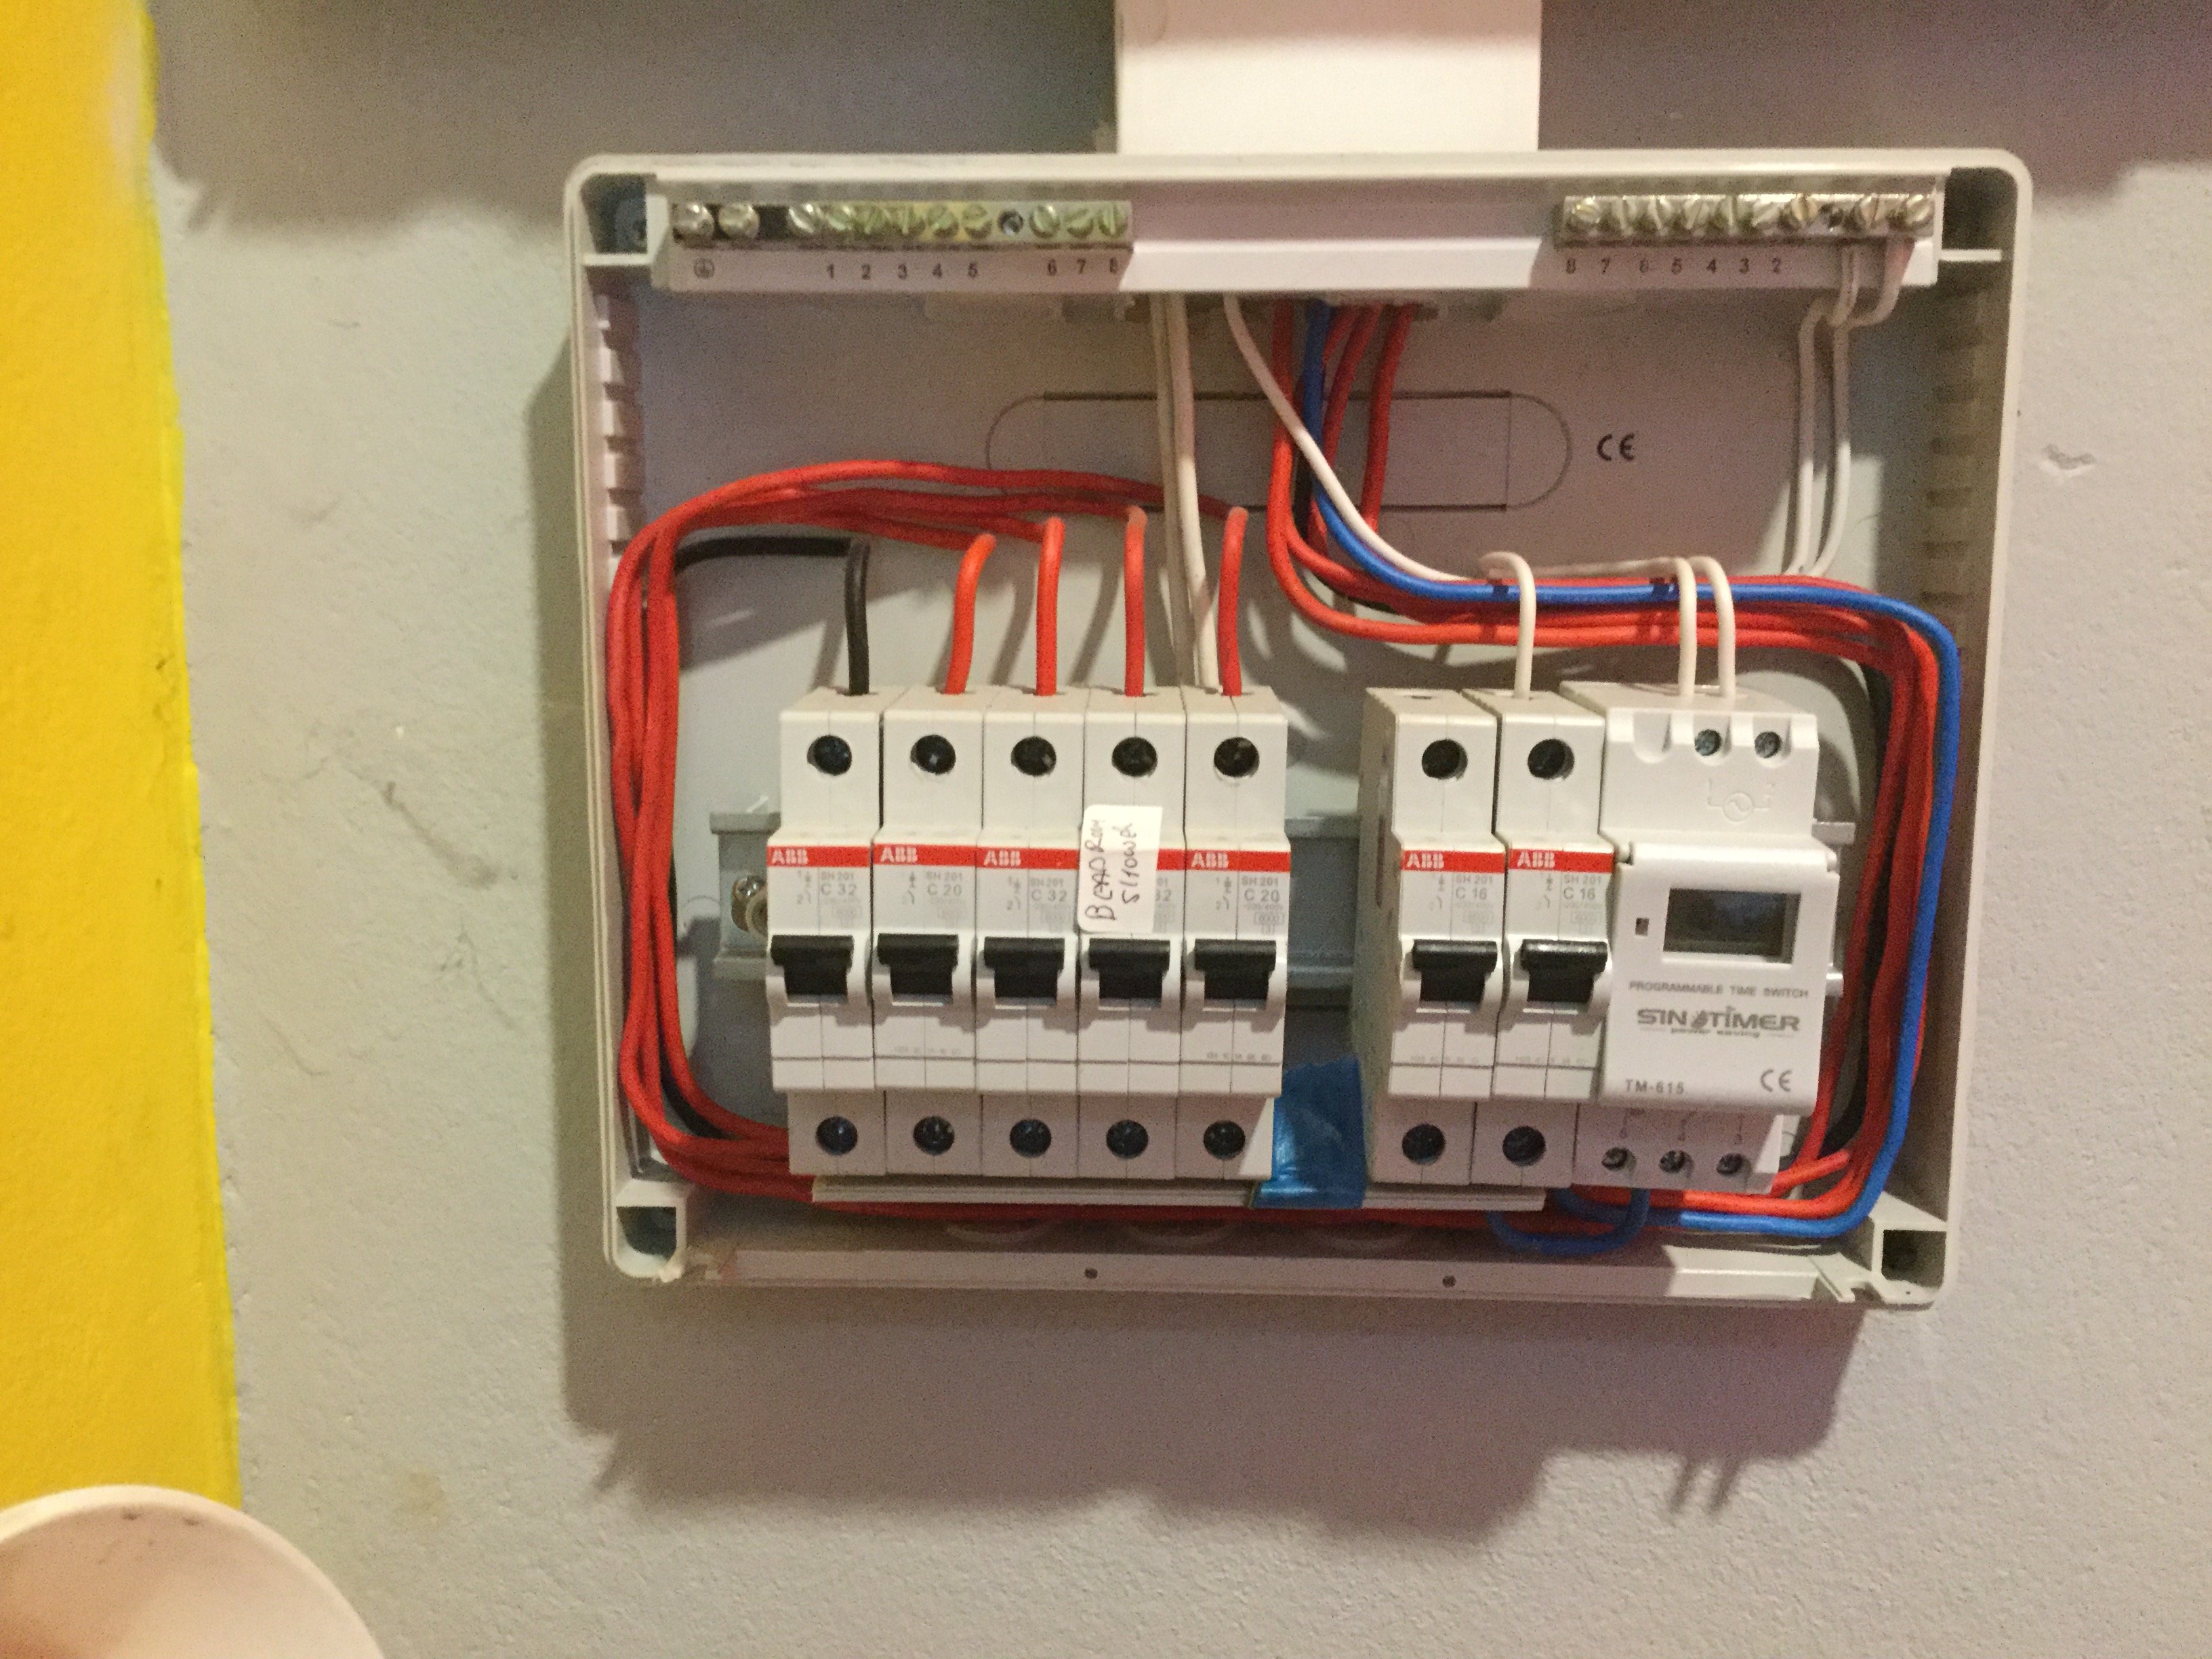 Strange Problem with Powerline in just one room. - The Electrical Forum ...